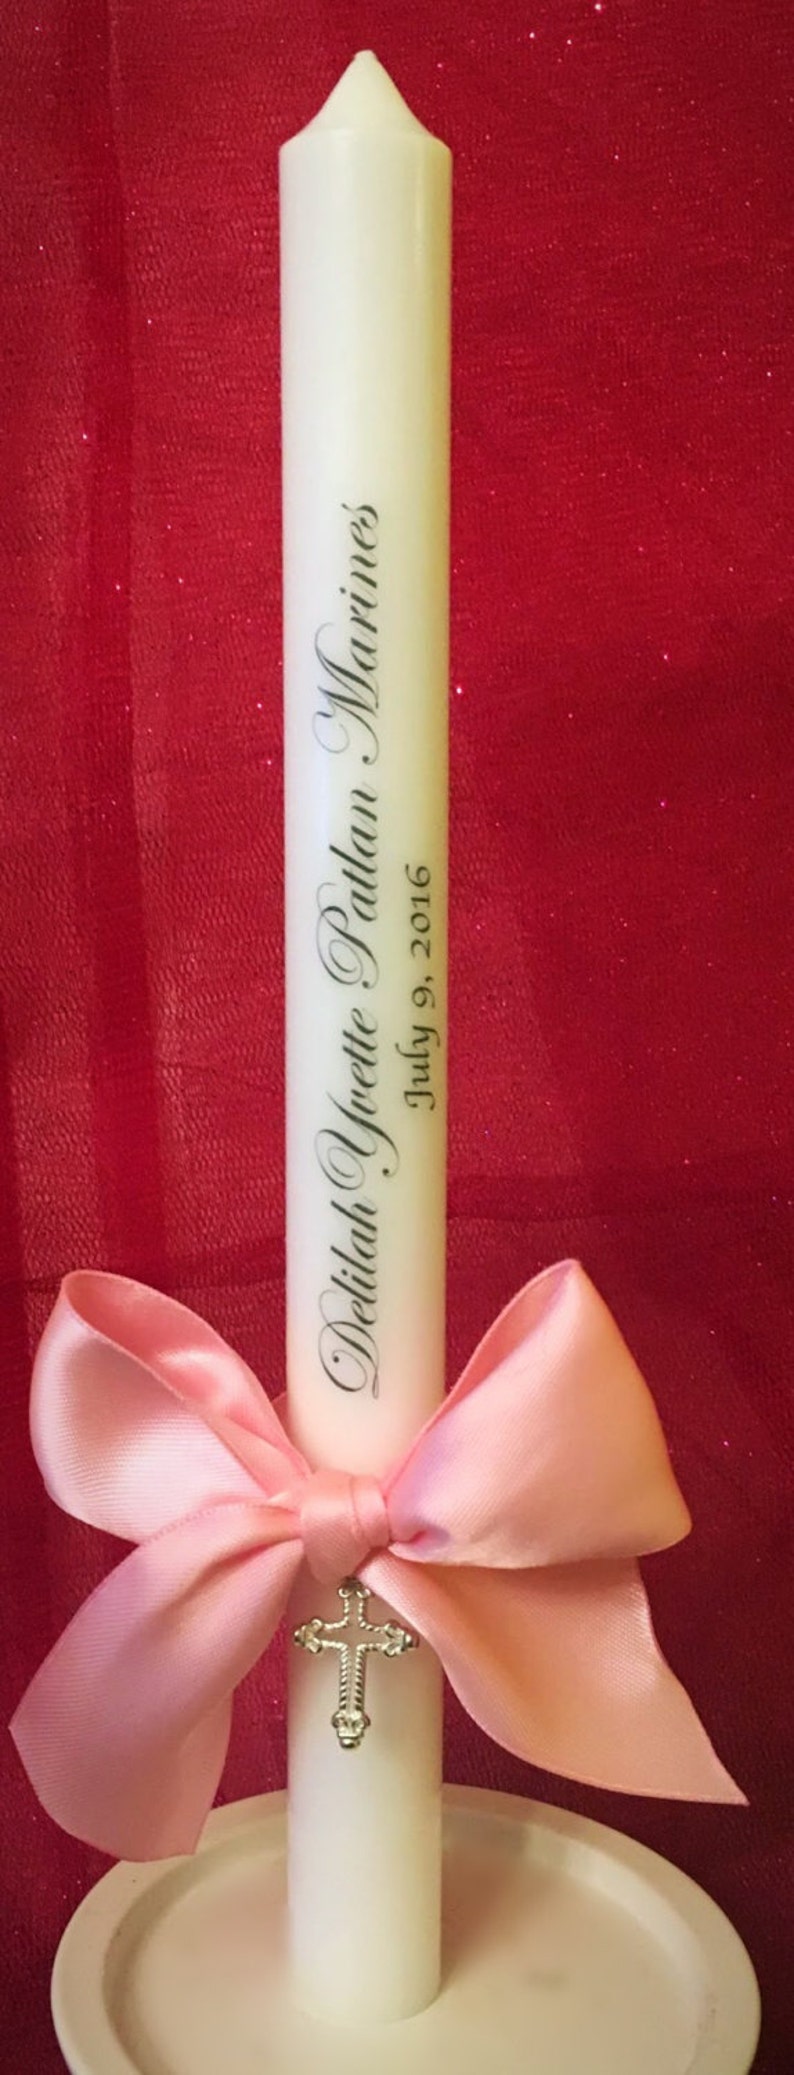 Personalized Baptismal Candles 10 inches 10 Personalized Ceremonial Baptism Candle with a bow, a charm. It's the perfect Baptism gift image 1